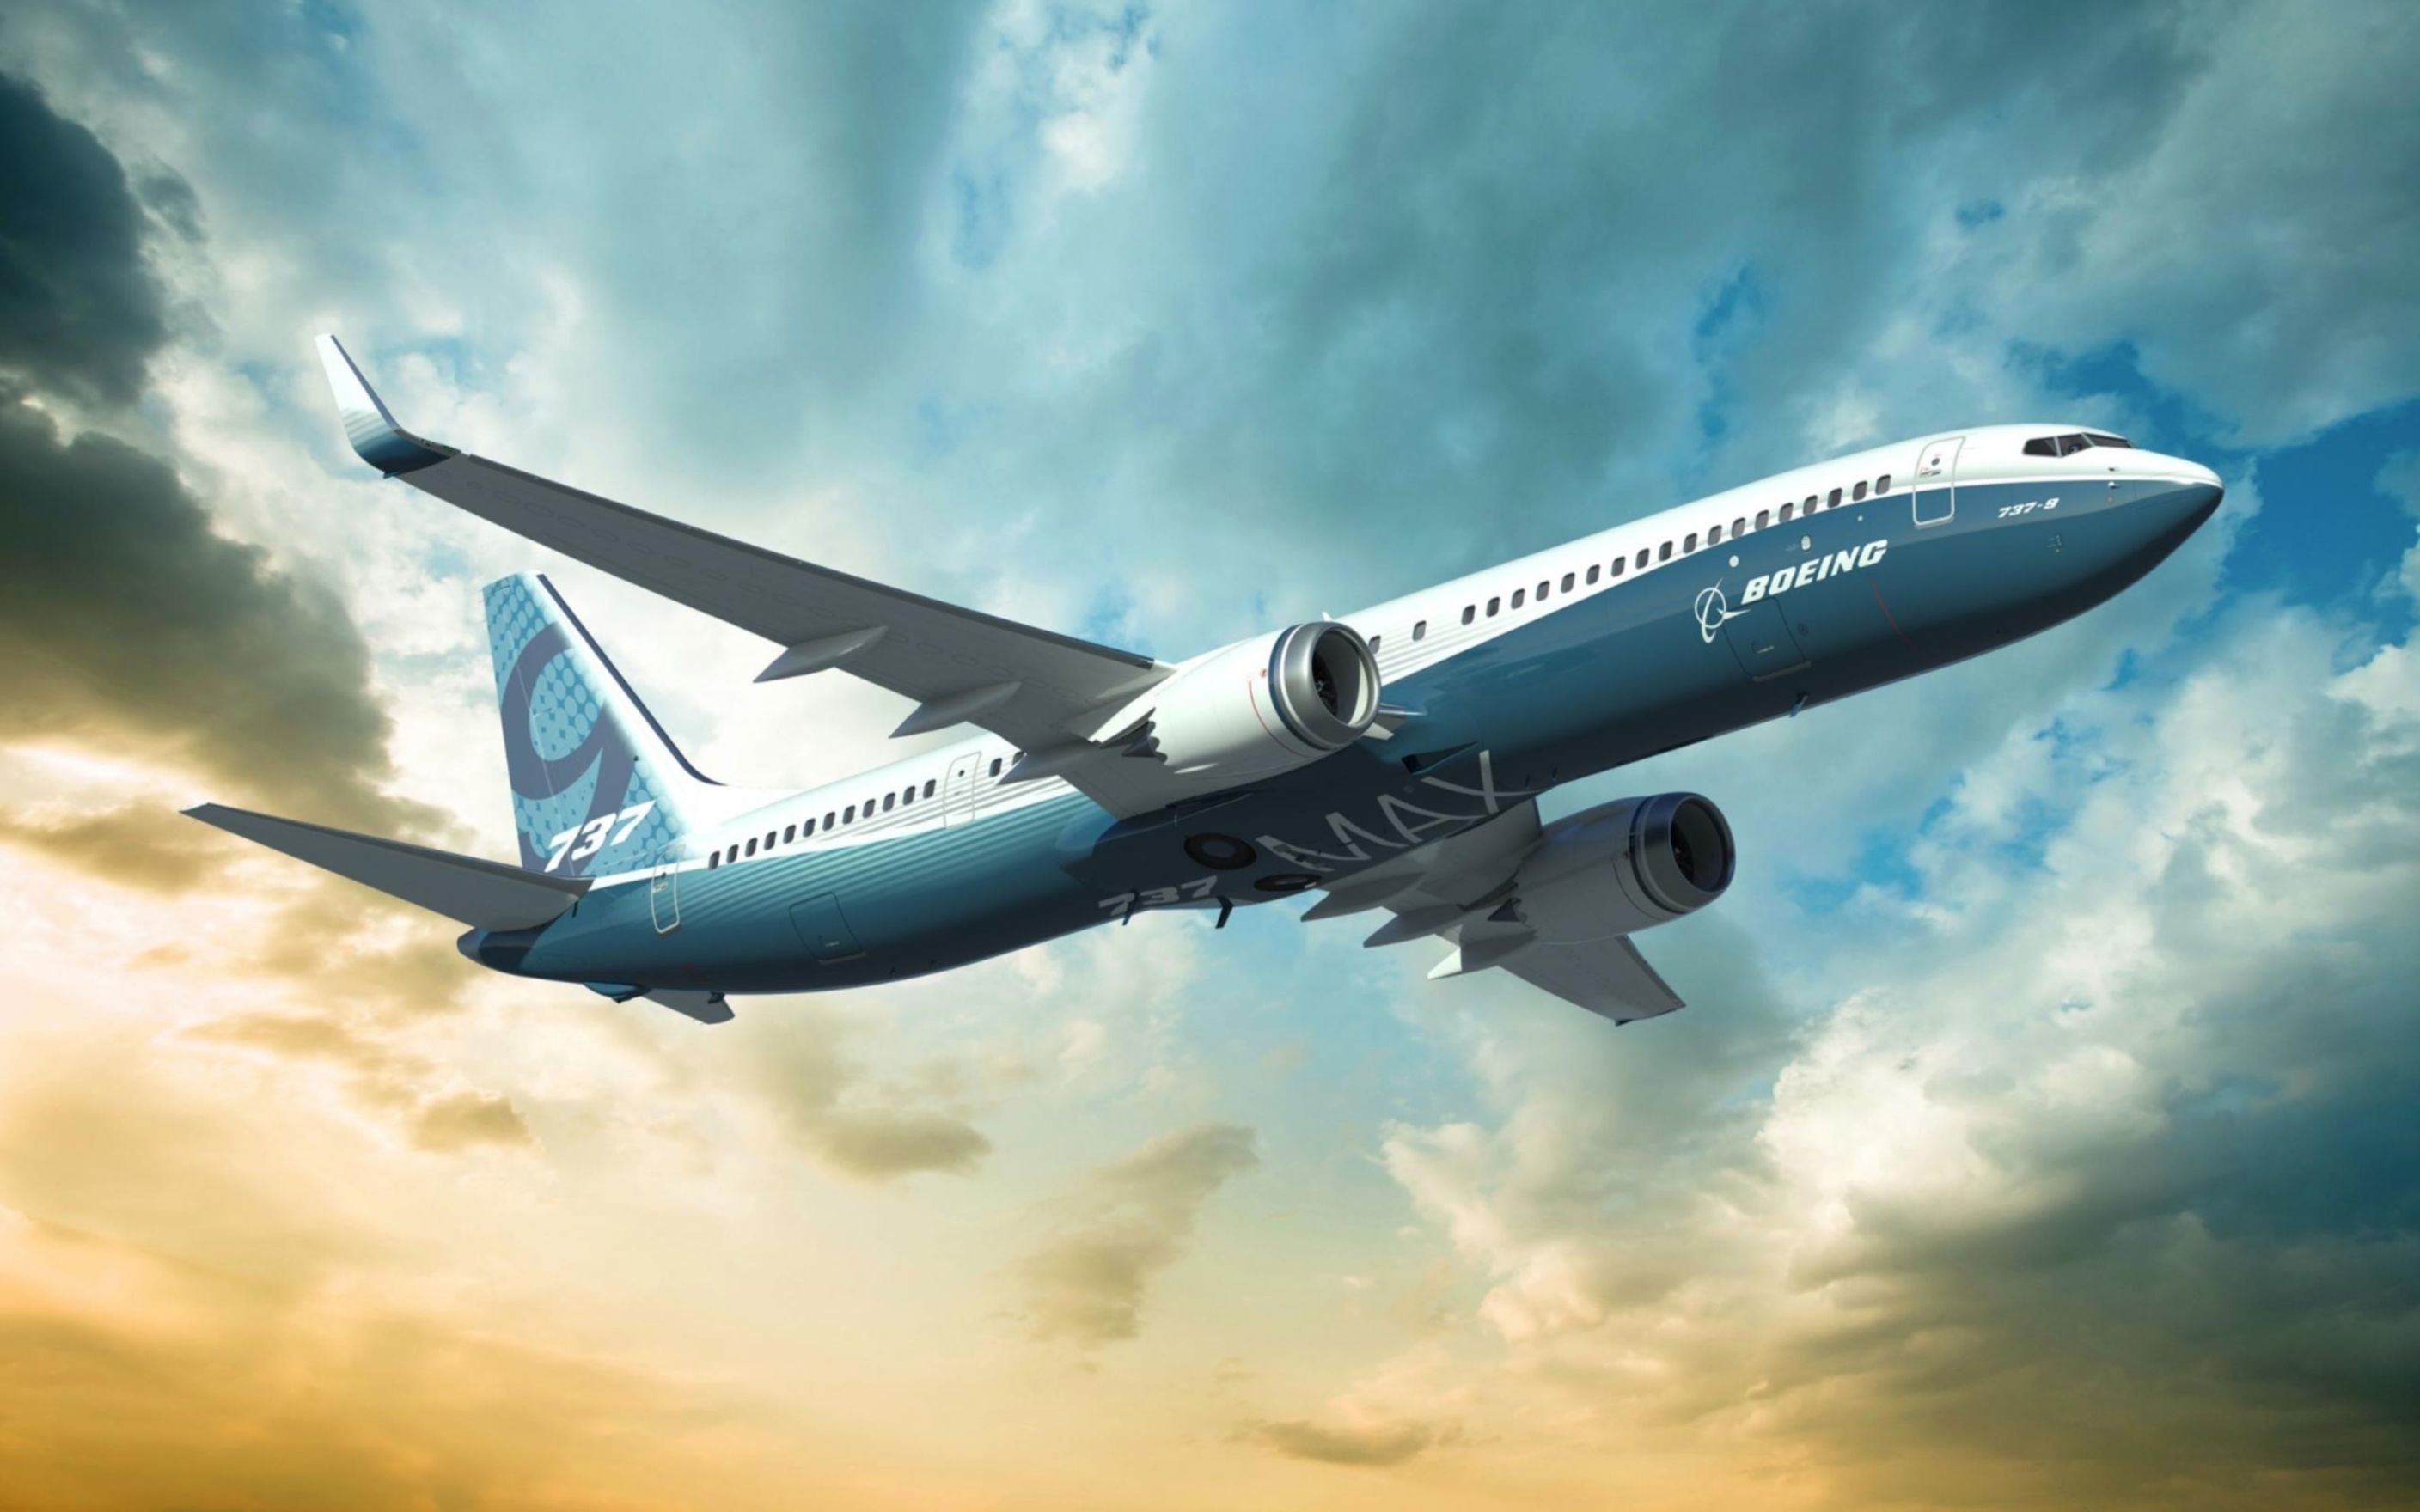 Boeing 737 Wallpapers - Top Free Boeing 737 Backgrounds 2820x1760